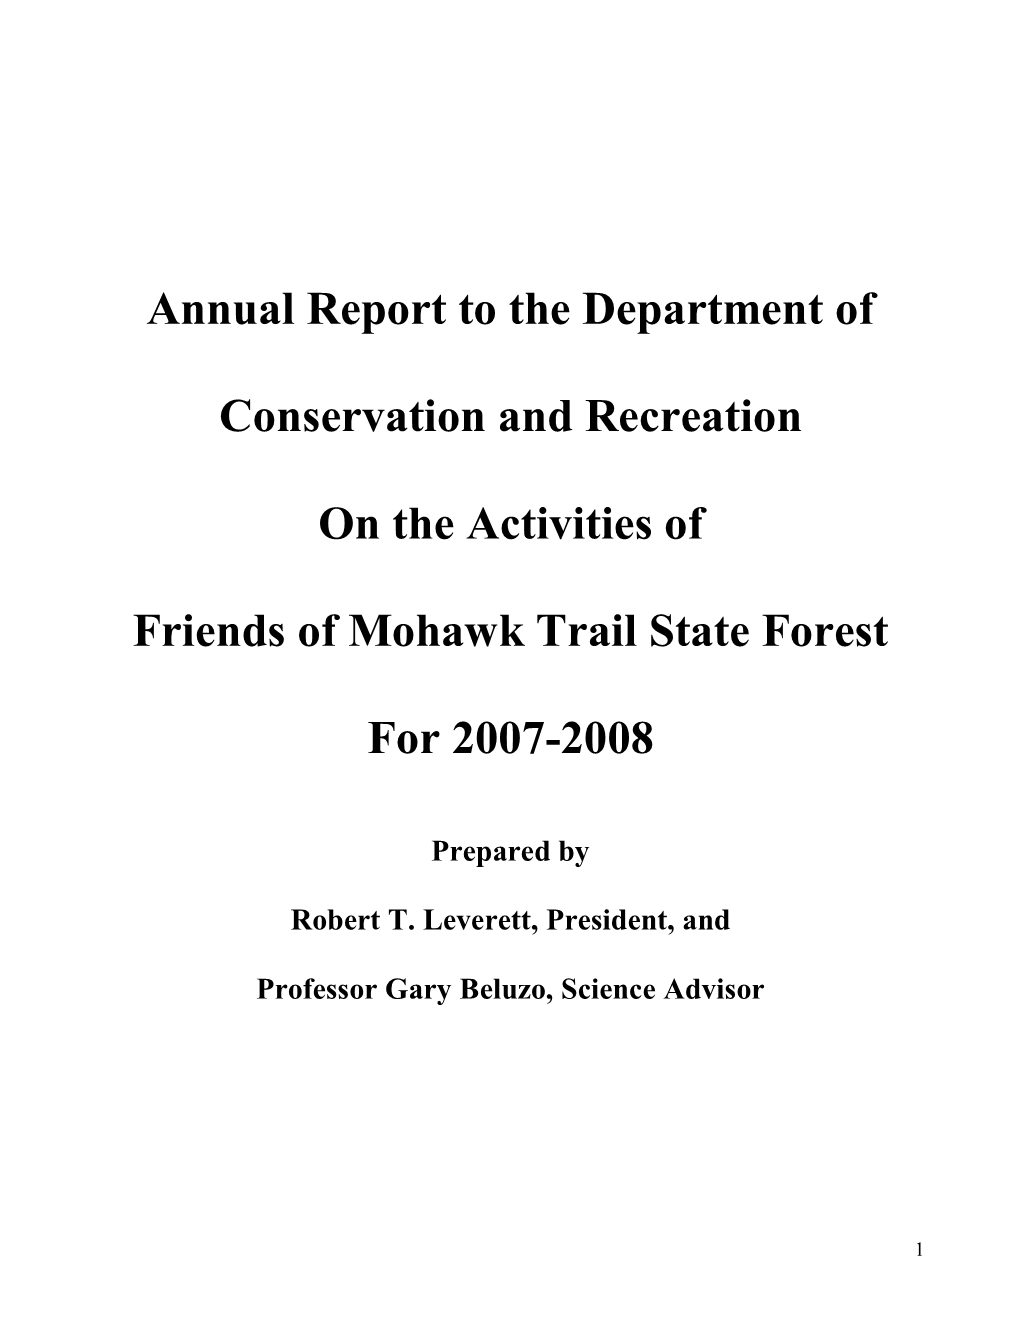 Annual Report to the Department of Conservation and Recreation on the Activities of Friends of Mohawk Trail State Forest for 2007-2008